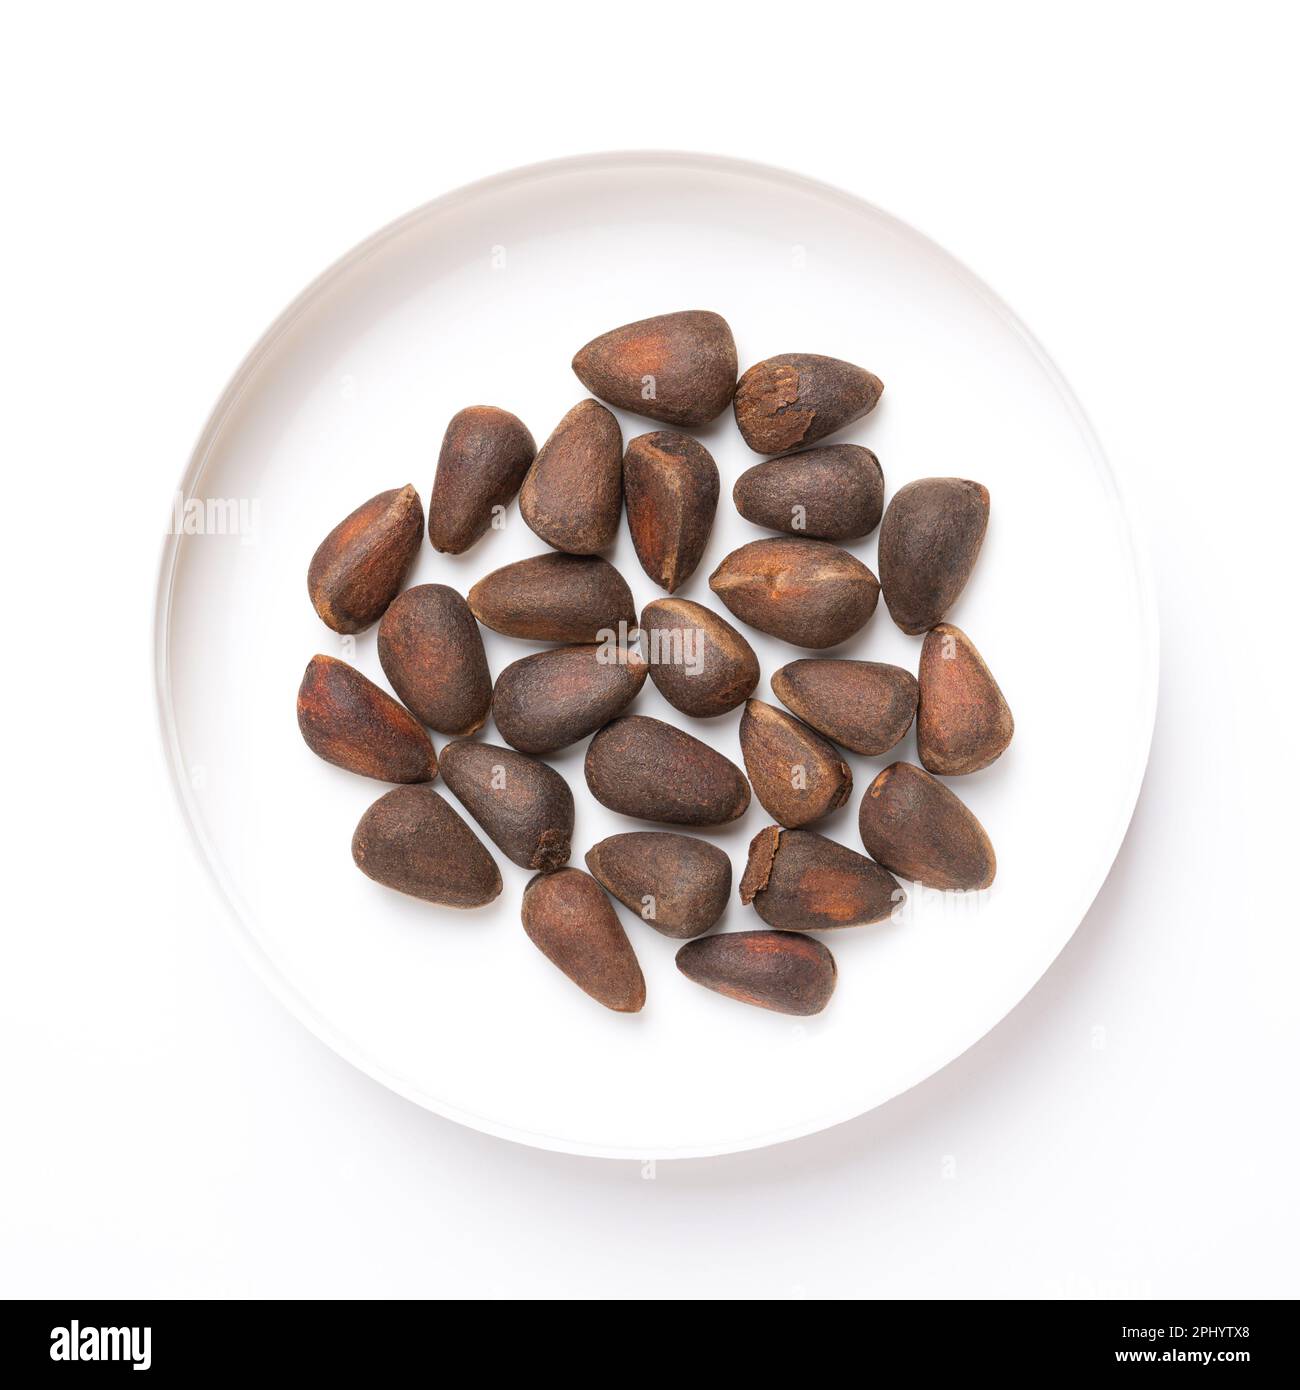 Seeds of a stone pine, in a white plastic lid, from above. Nuts from a cone of Pinus cembra, also known as Swiss, Arolla or Austrian stone pine. Stock Photo